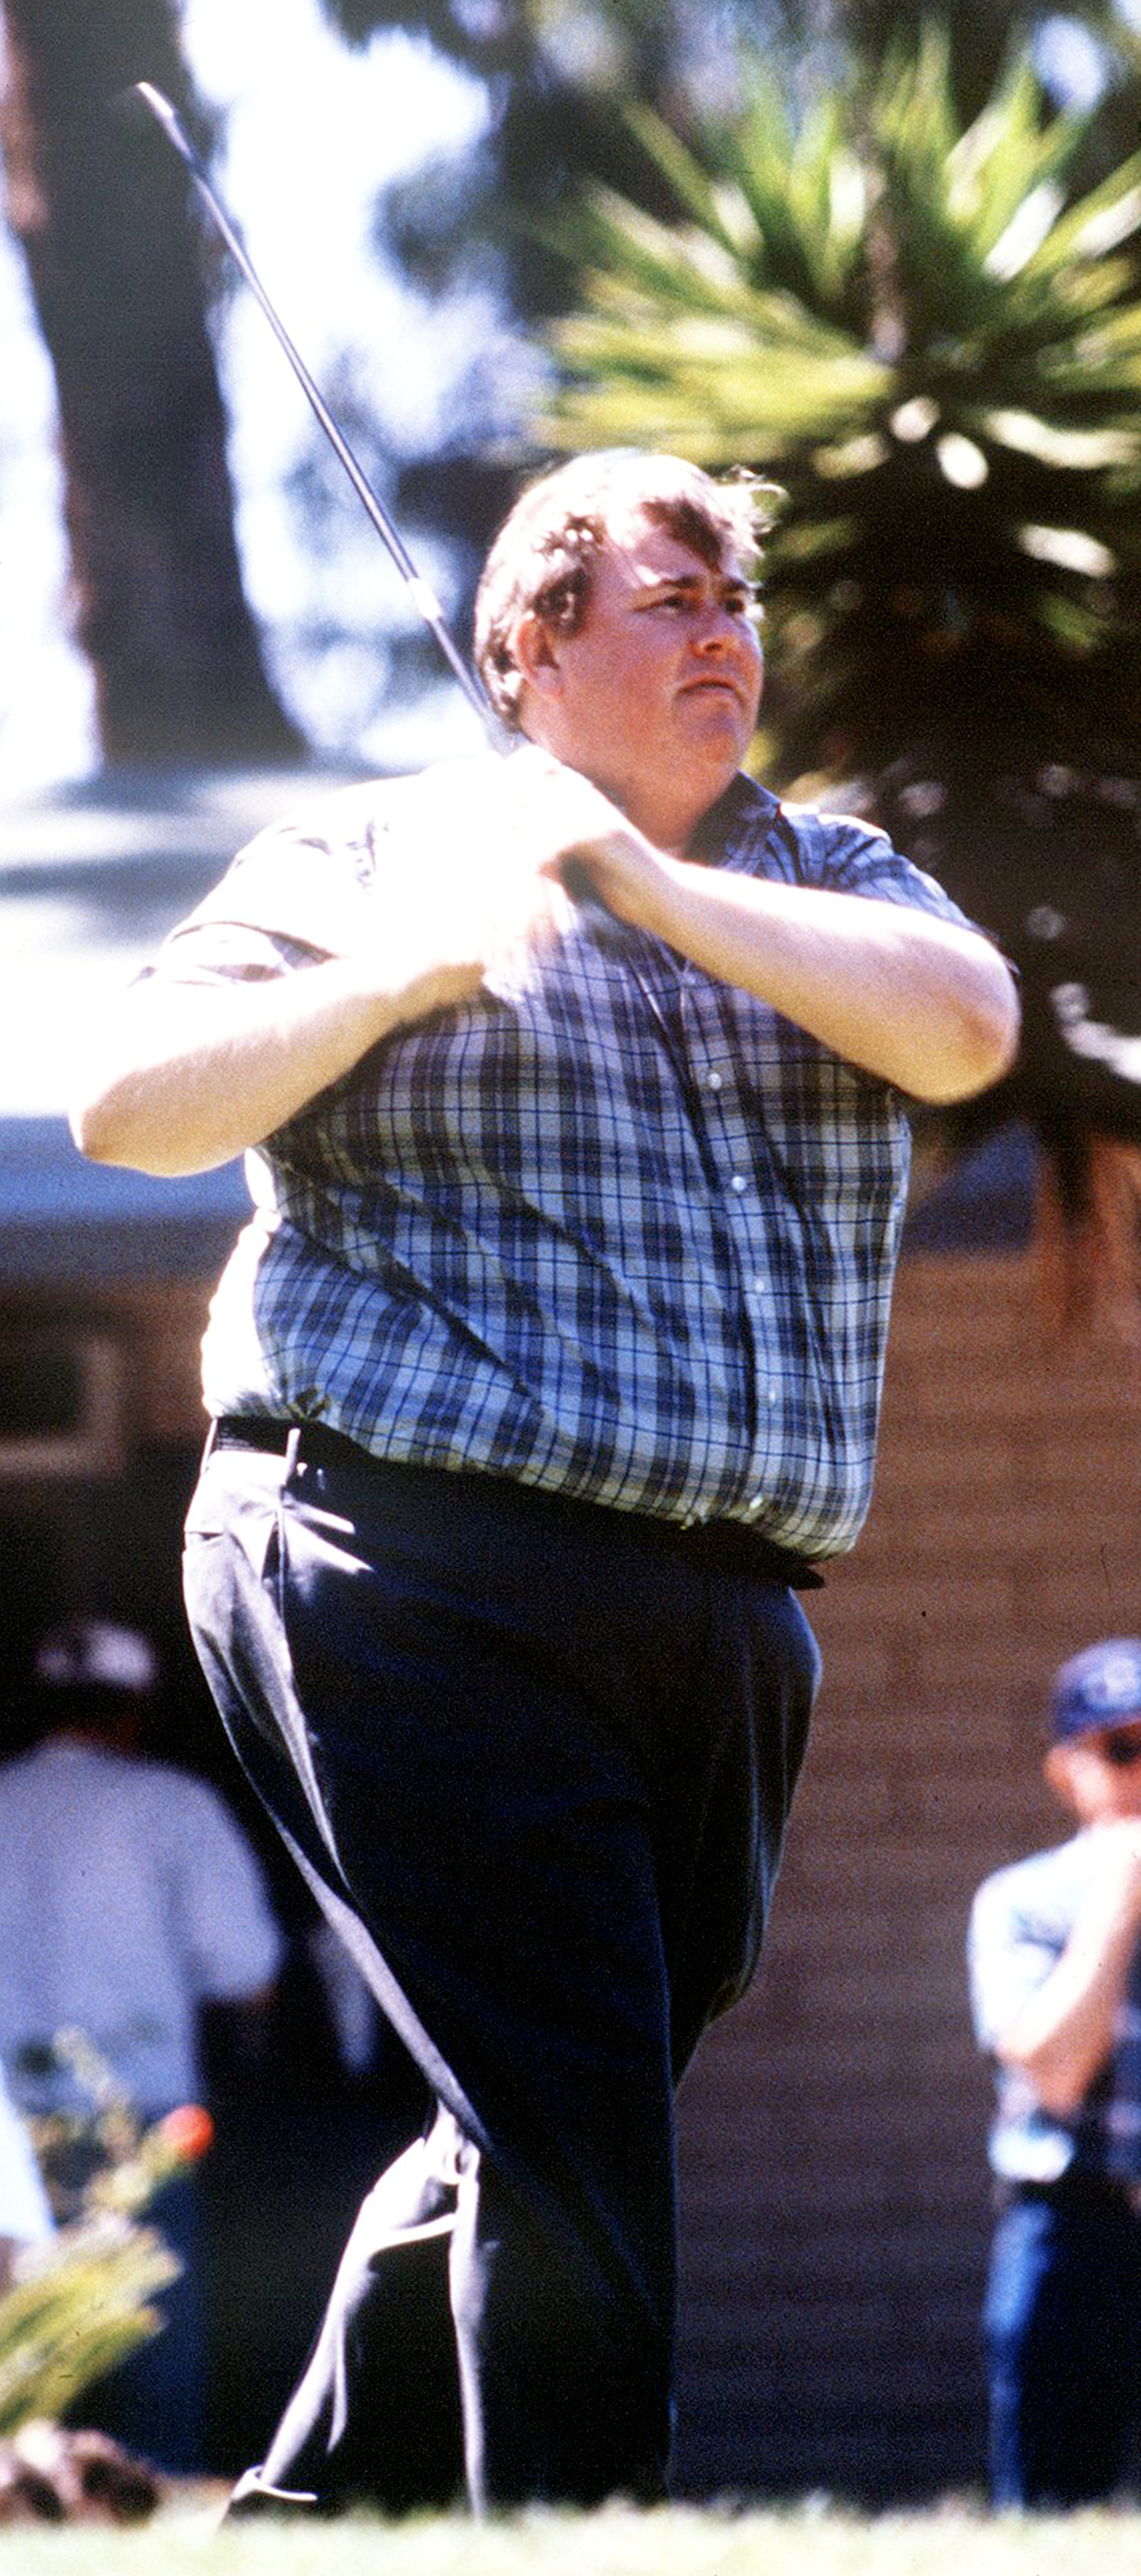 John Candy jouant au golf, vers 1990 | Source : Getty Images